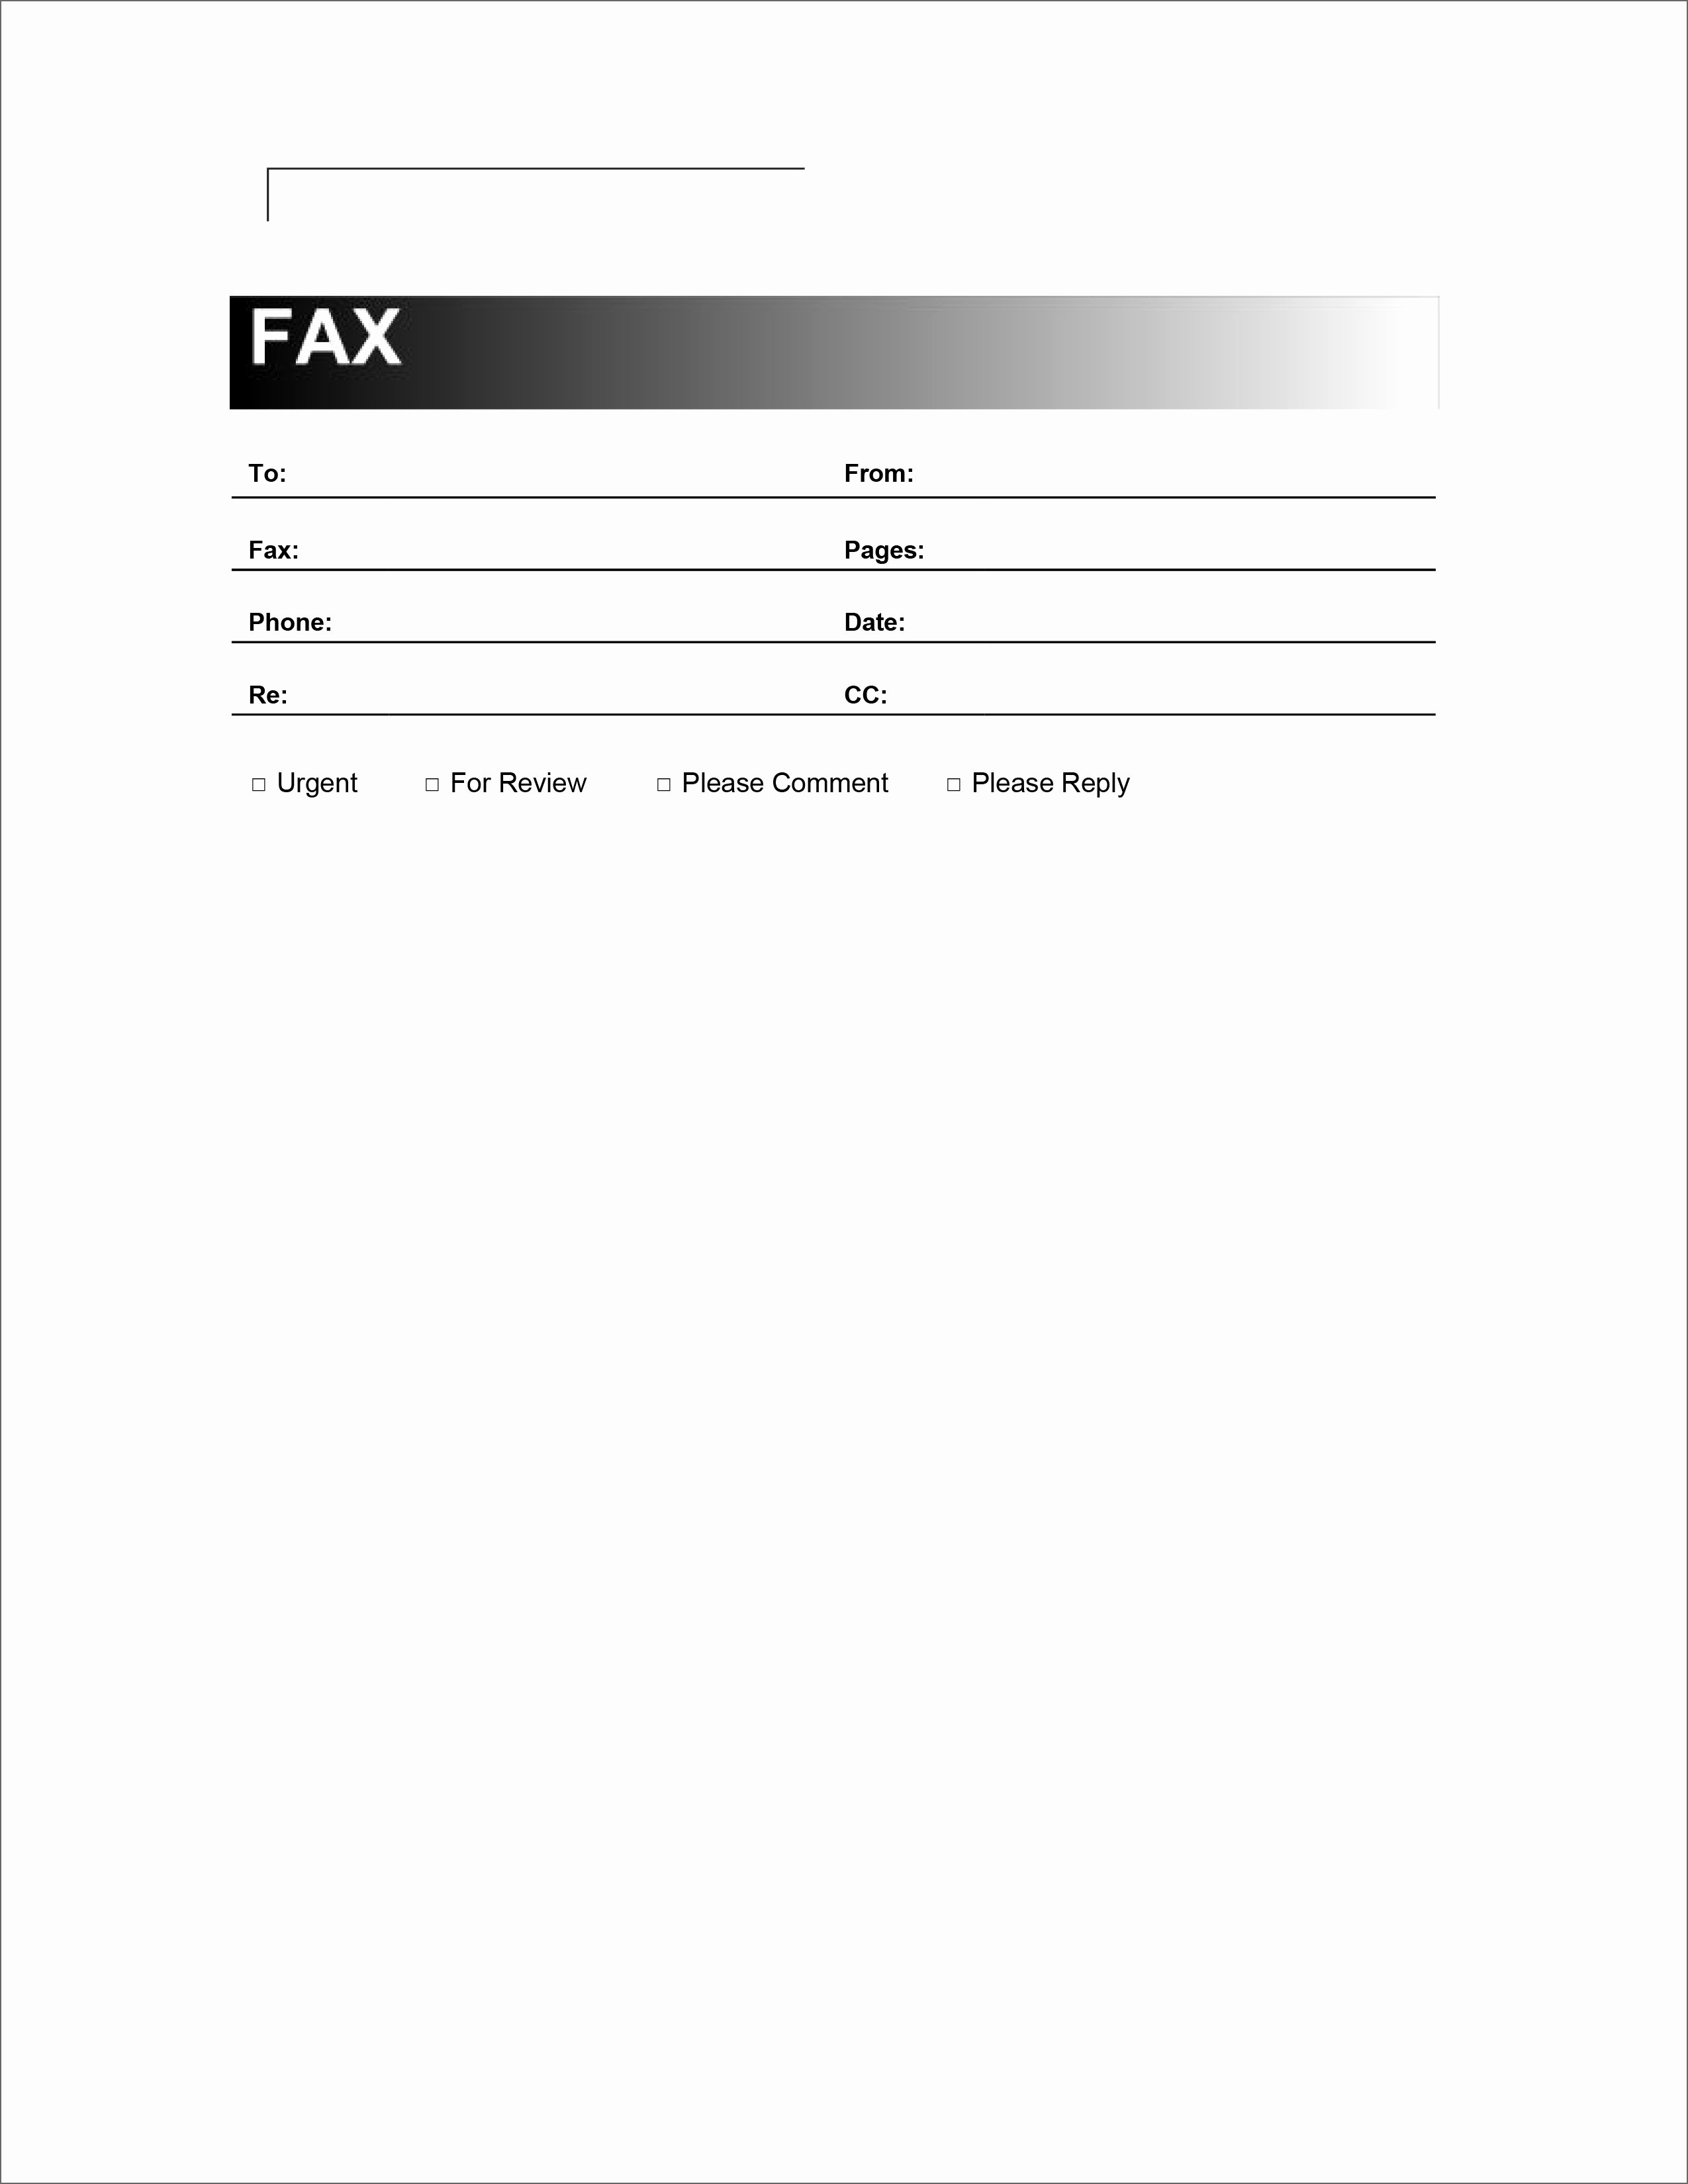 Fax Cover Sheet Template Inspirational 20 Free Fax Cover Templates Sheets In Microsoft Fice Docx